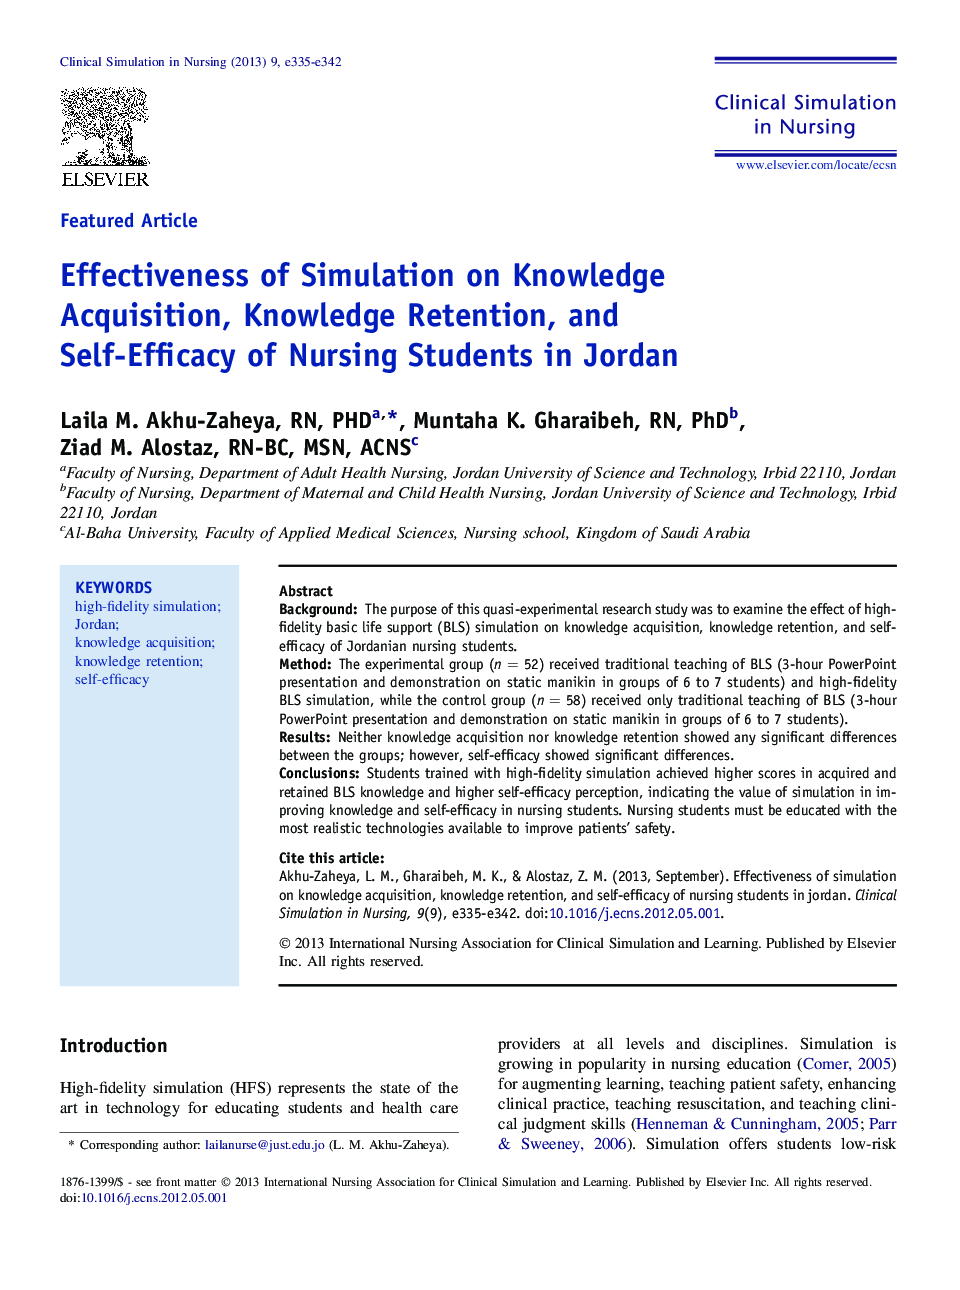 Effectiveness of Simulation on Knowledge Acquisition, Knowledge Retention, and Self-Efficacy of Nursing Students in Jordan